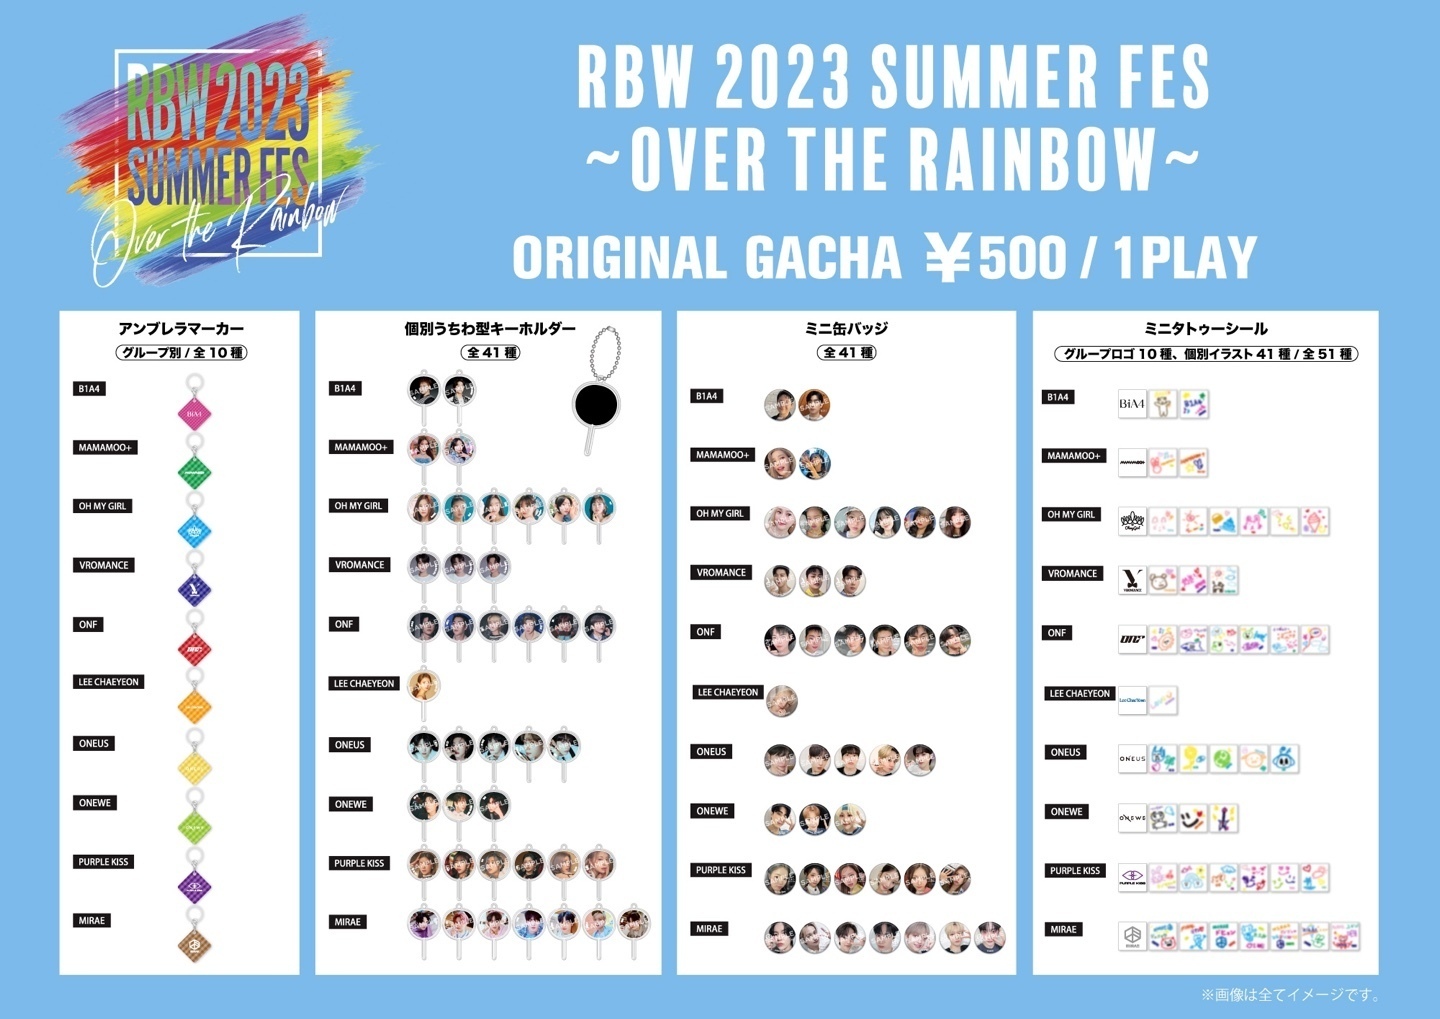 EVENT】「RBW 2023 SUMMER FES〜Over the Rainbow〜」日本公演